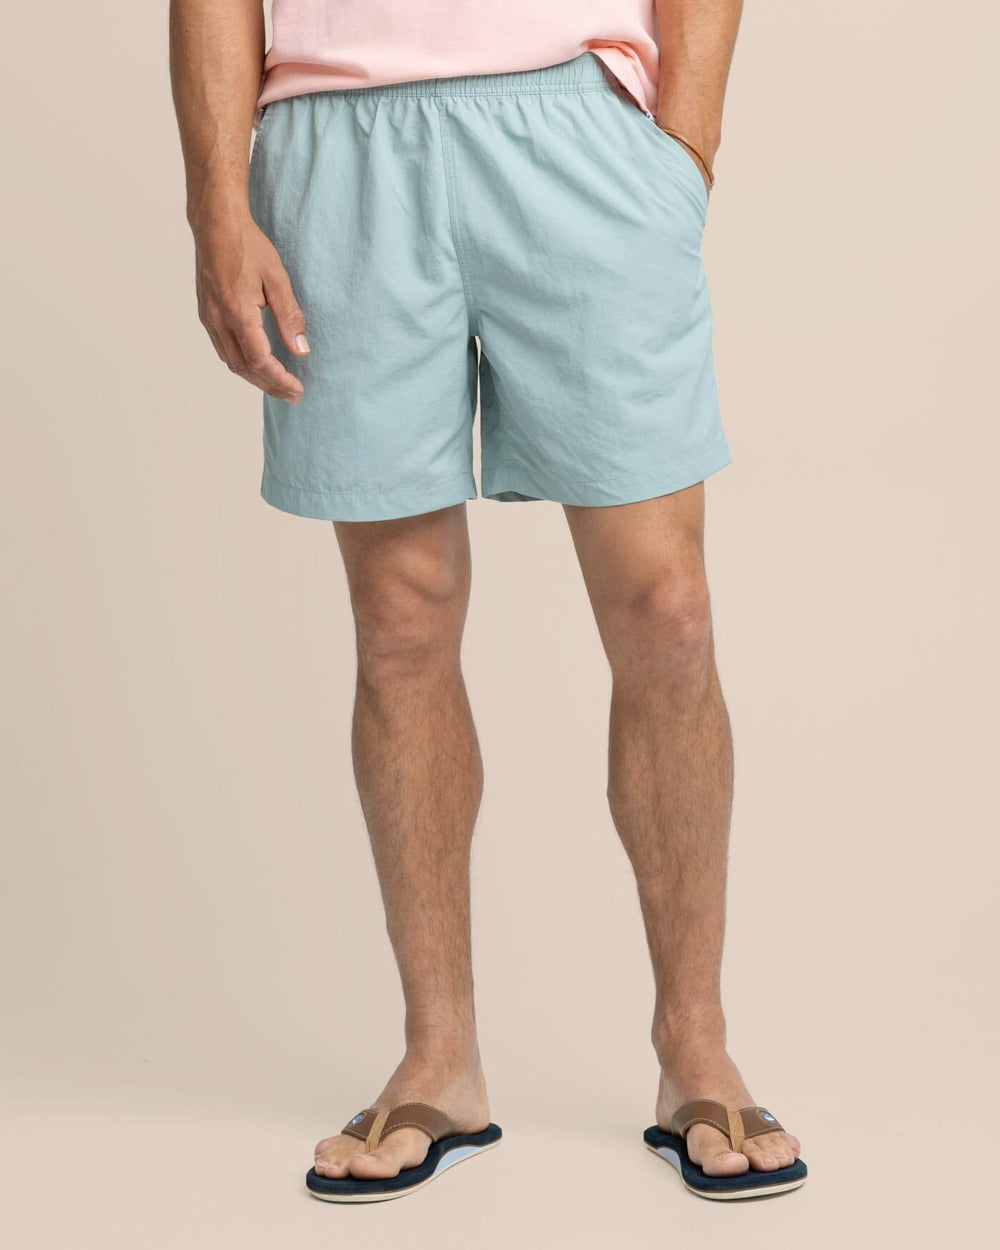 The front view of the Southern Tide Shoreline 6 Nylon Short by Southern Tide - Green Surf